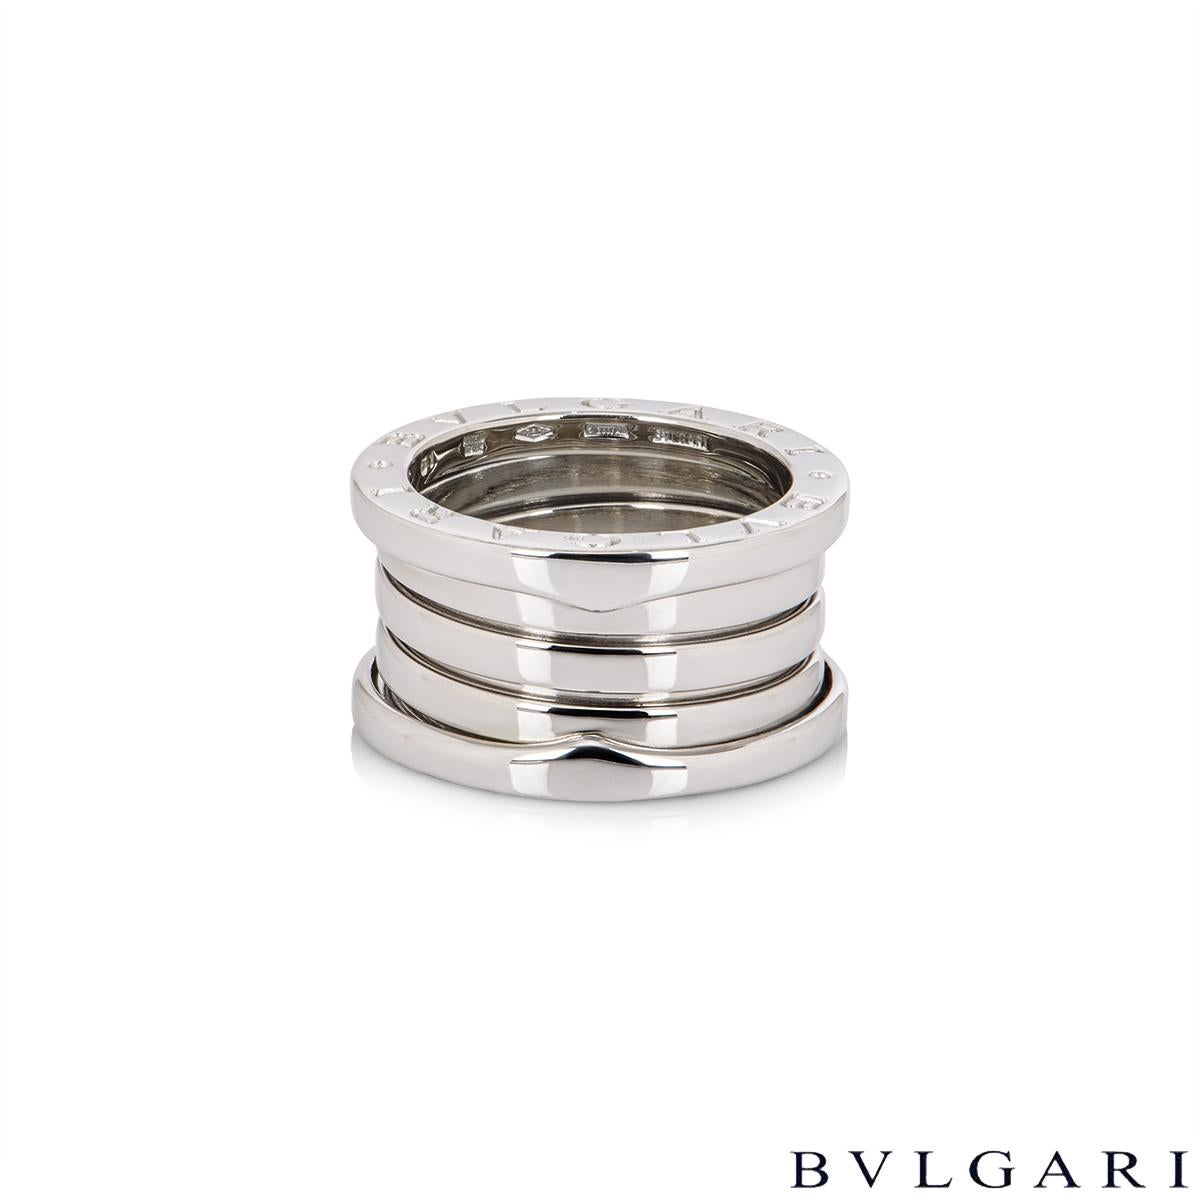 Bvlgari White Gold B.Zero1 Ring Size 52 323555 In Excellent Condition For Sale In London, GB